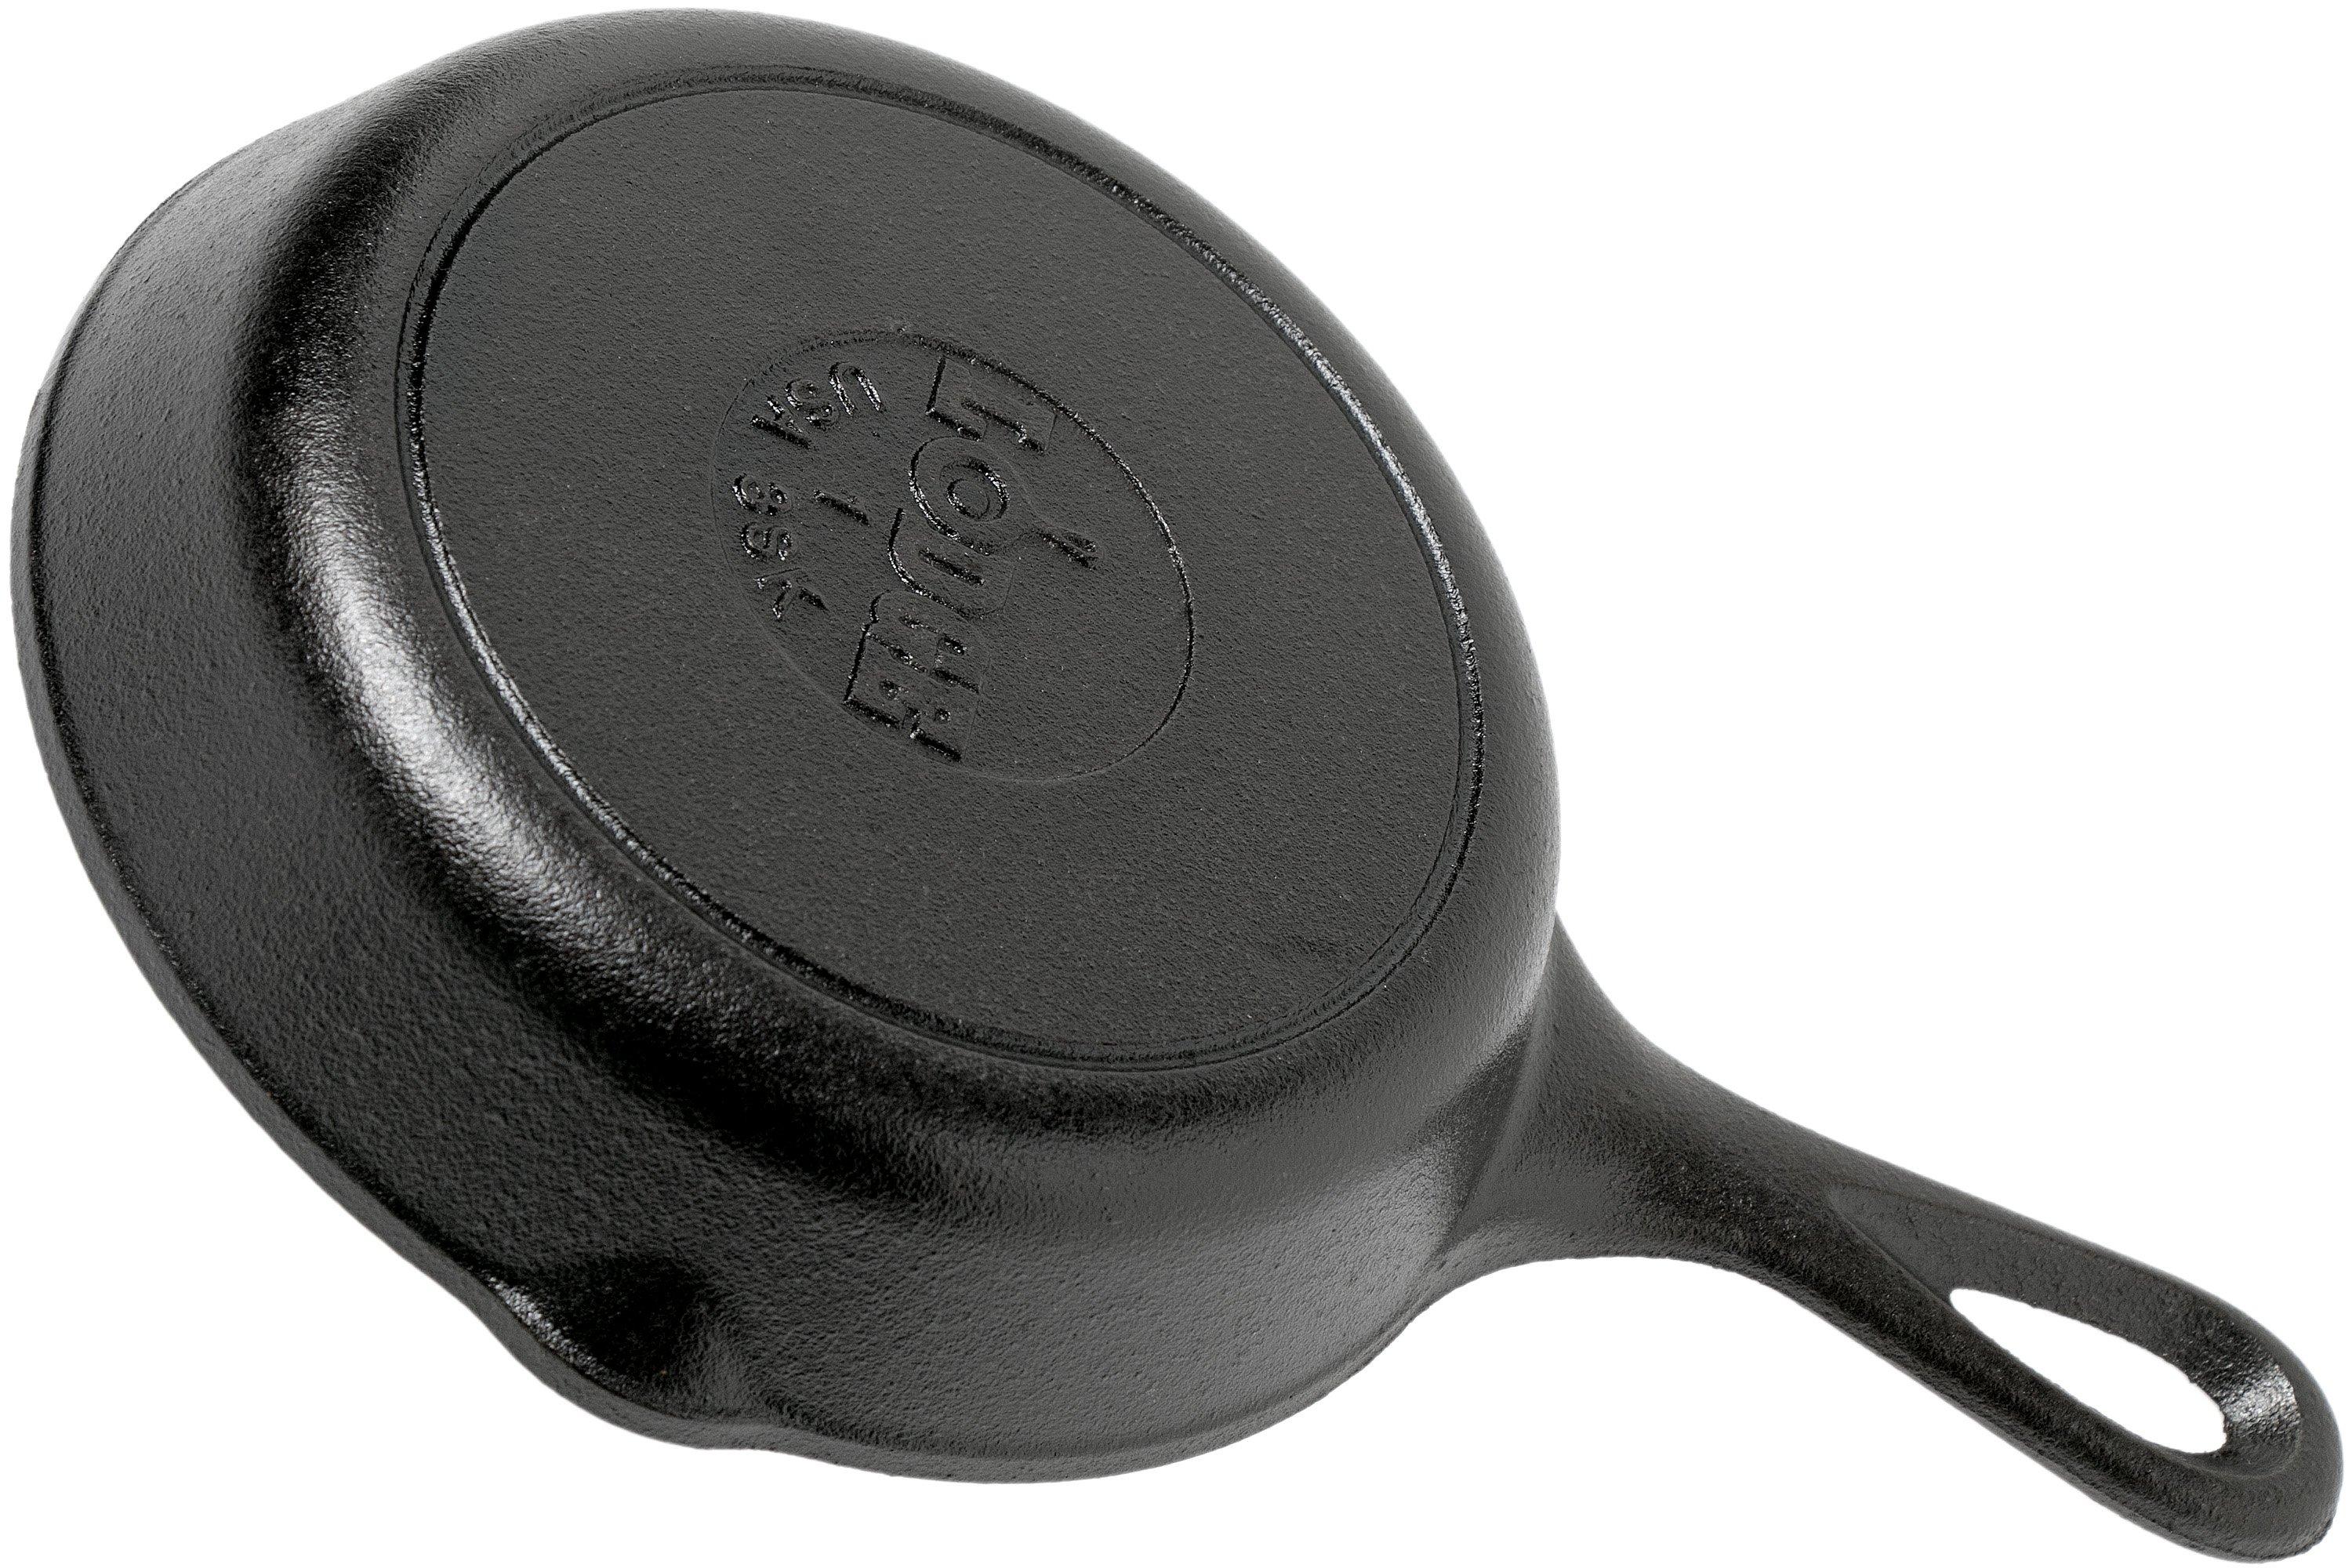 Lodge Cast Iron Skillet 8 inches